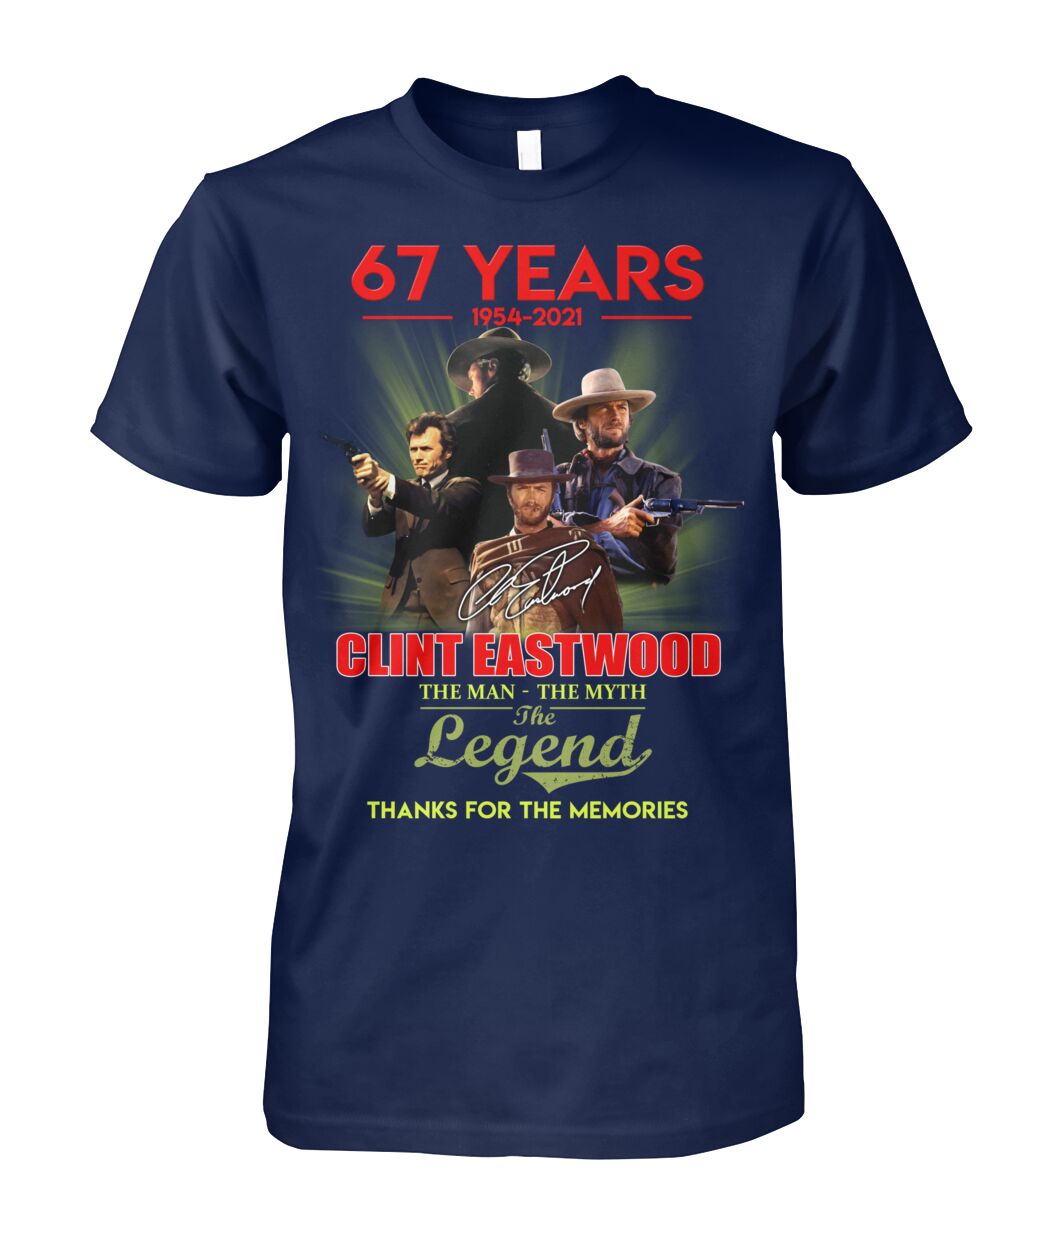 67 years Clint Eastwood The man the myth the legend shirt, hoodie and sweatshirt